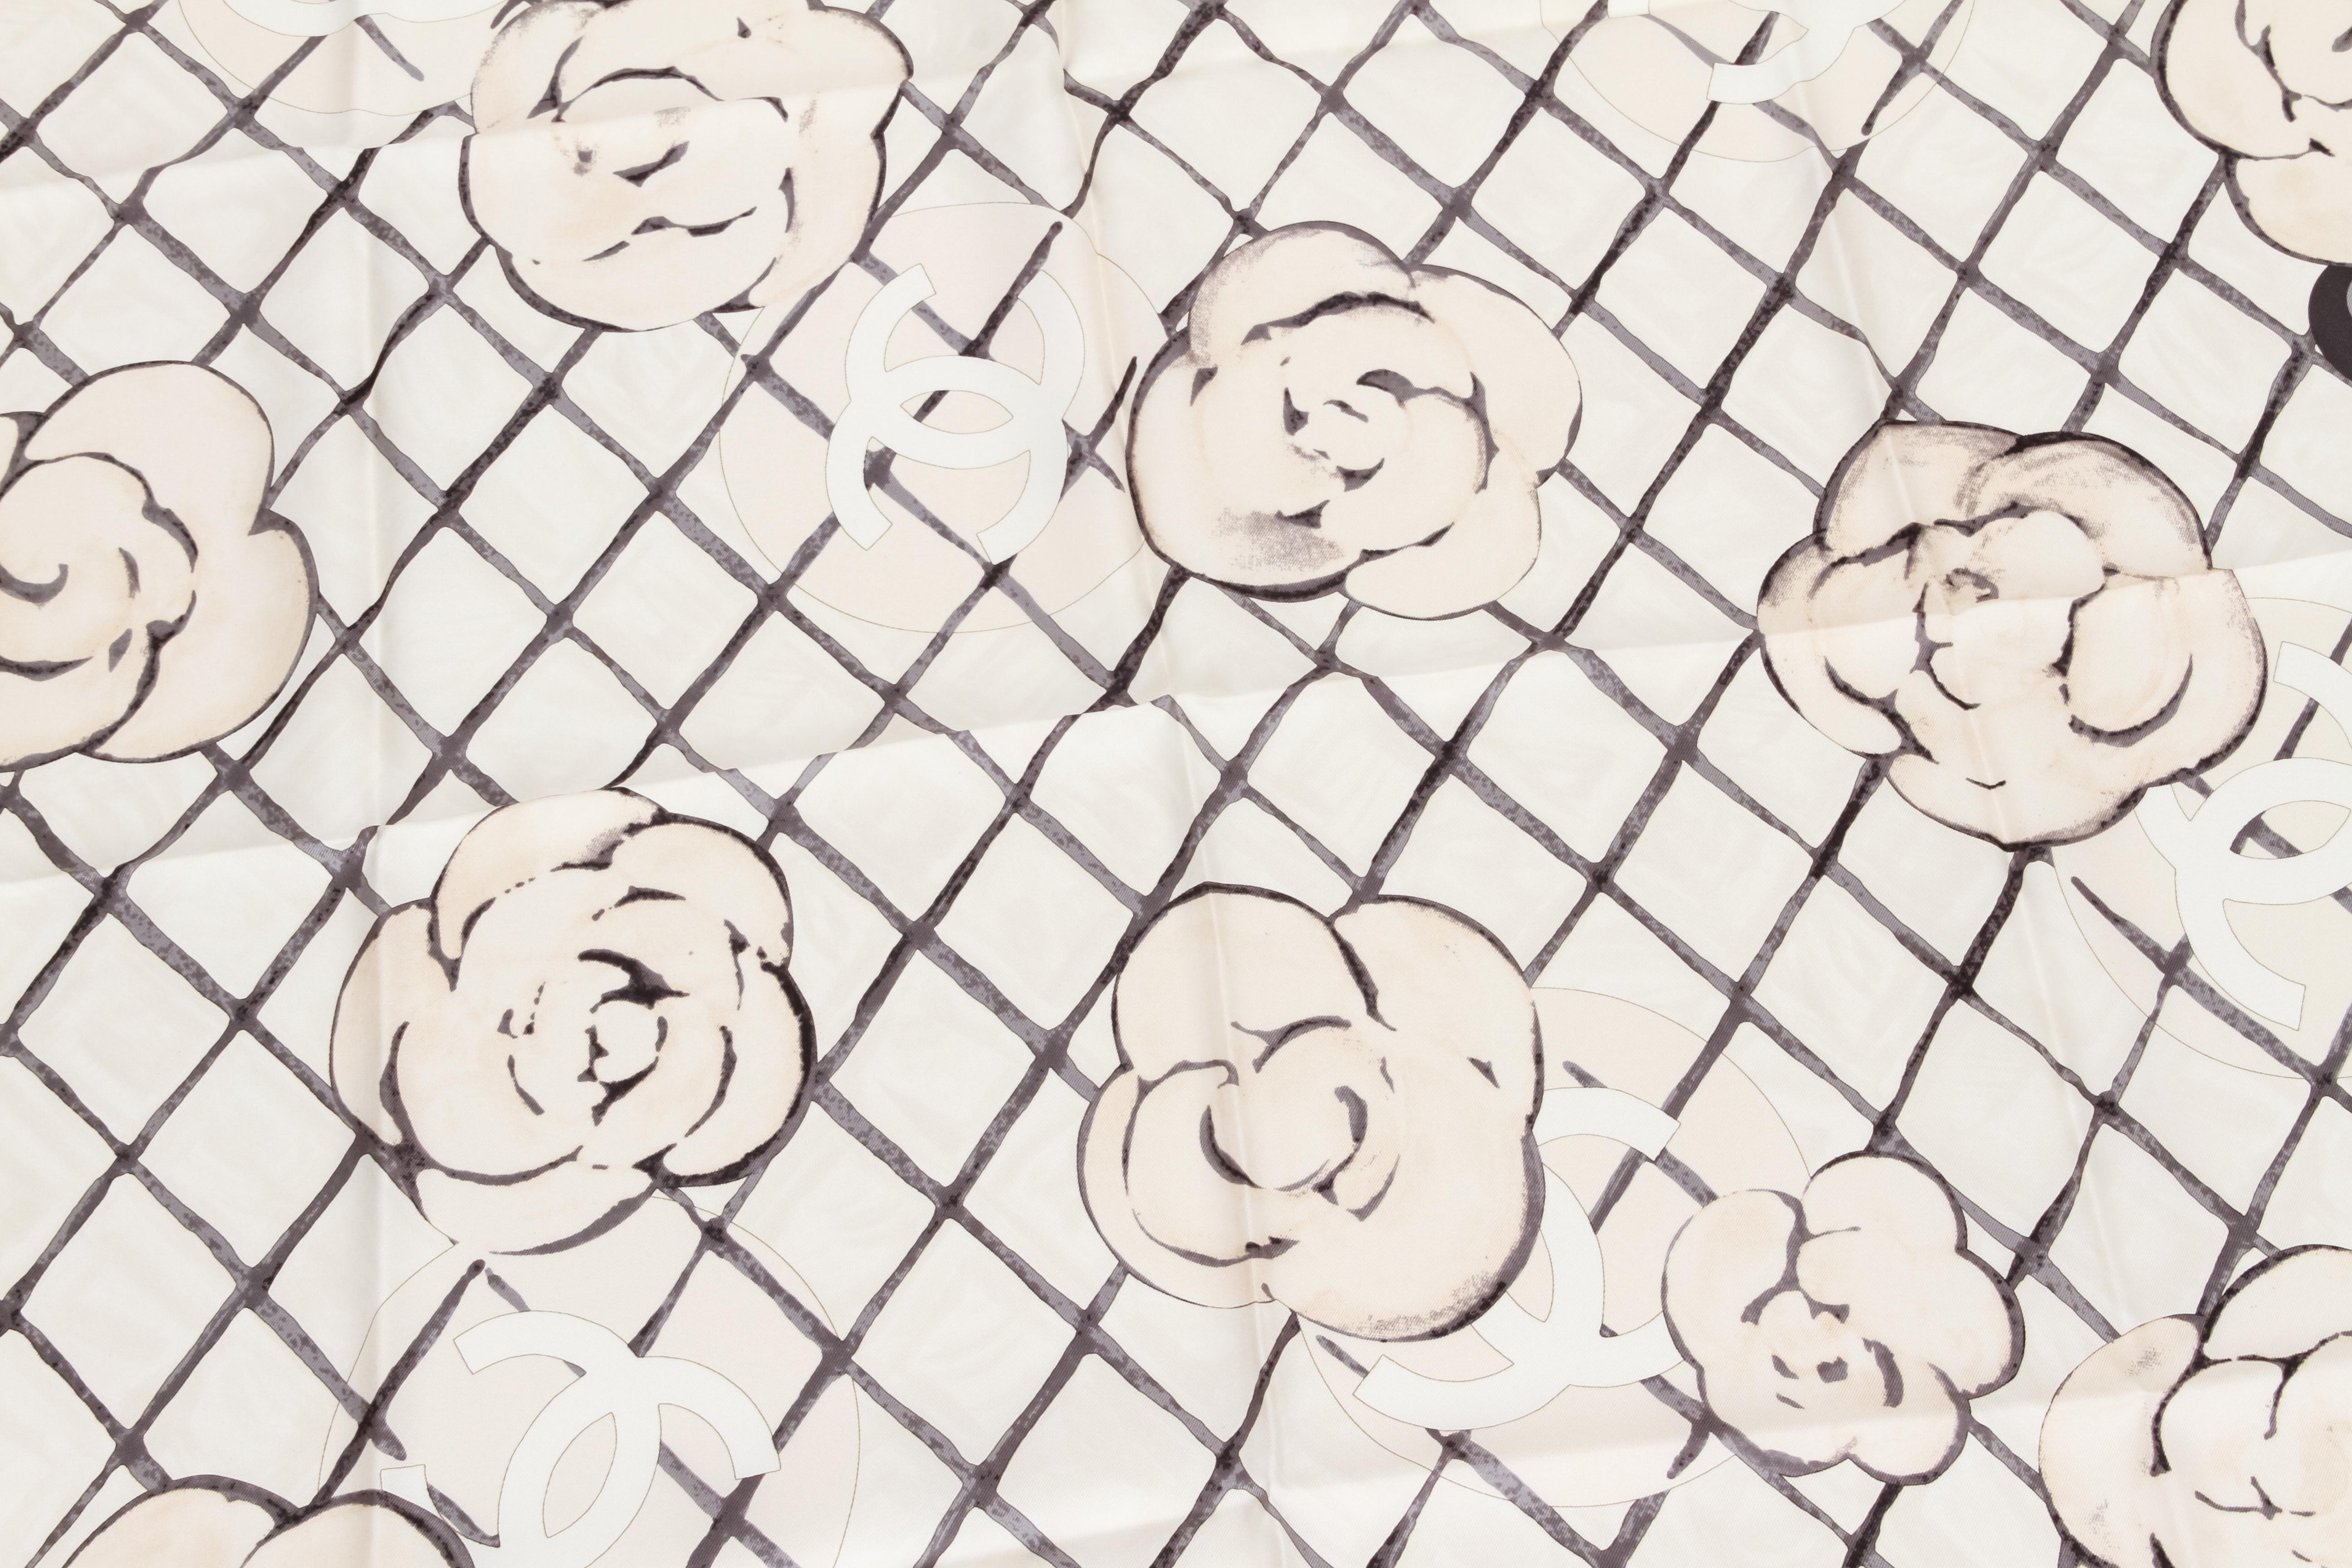 New Chanel White Camellia Silk Scarf, 2019 collection. 
35